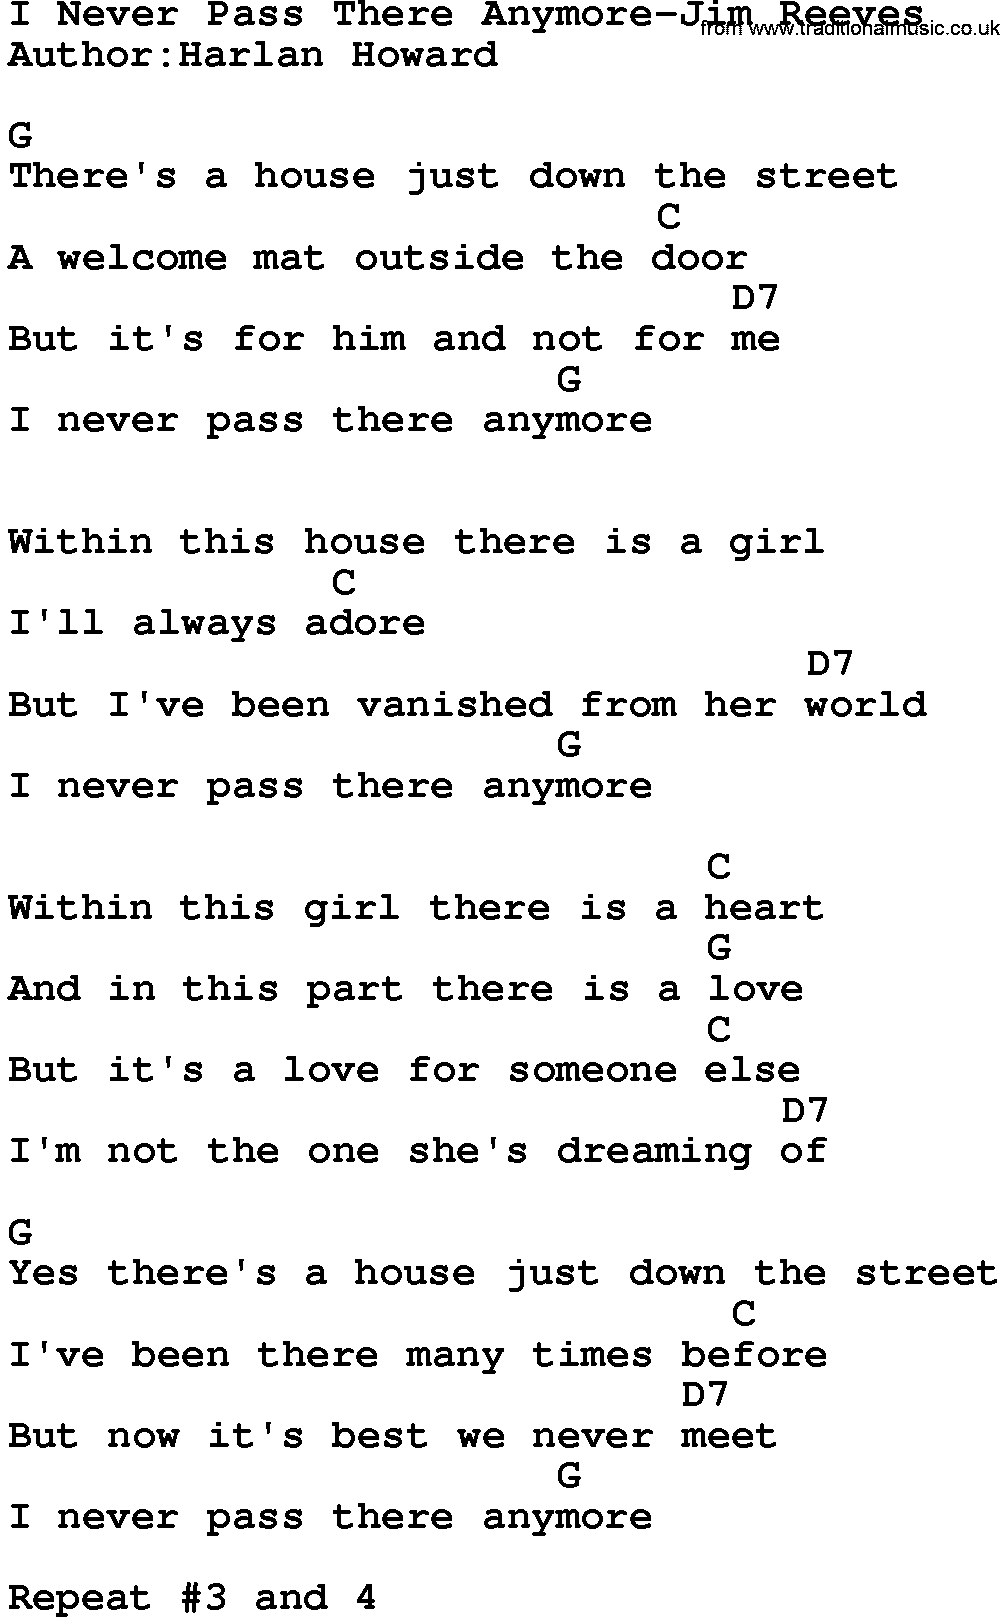 Country music song: I Never Pass There Anymore-Jim Reeves lyrics and chords